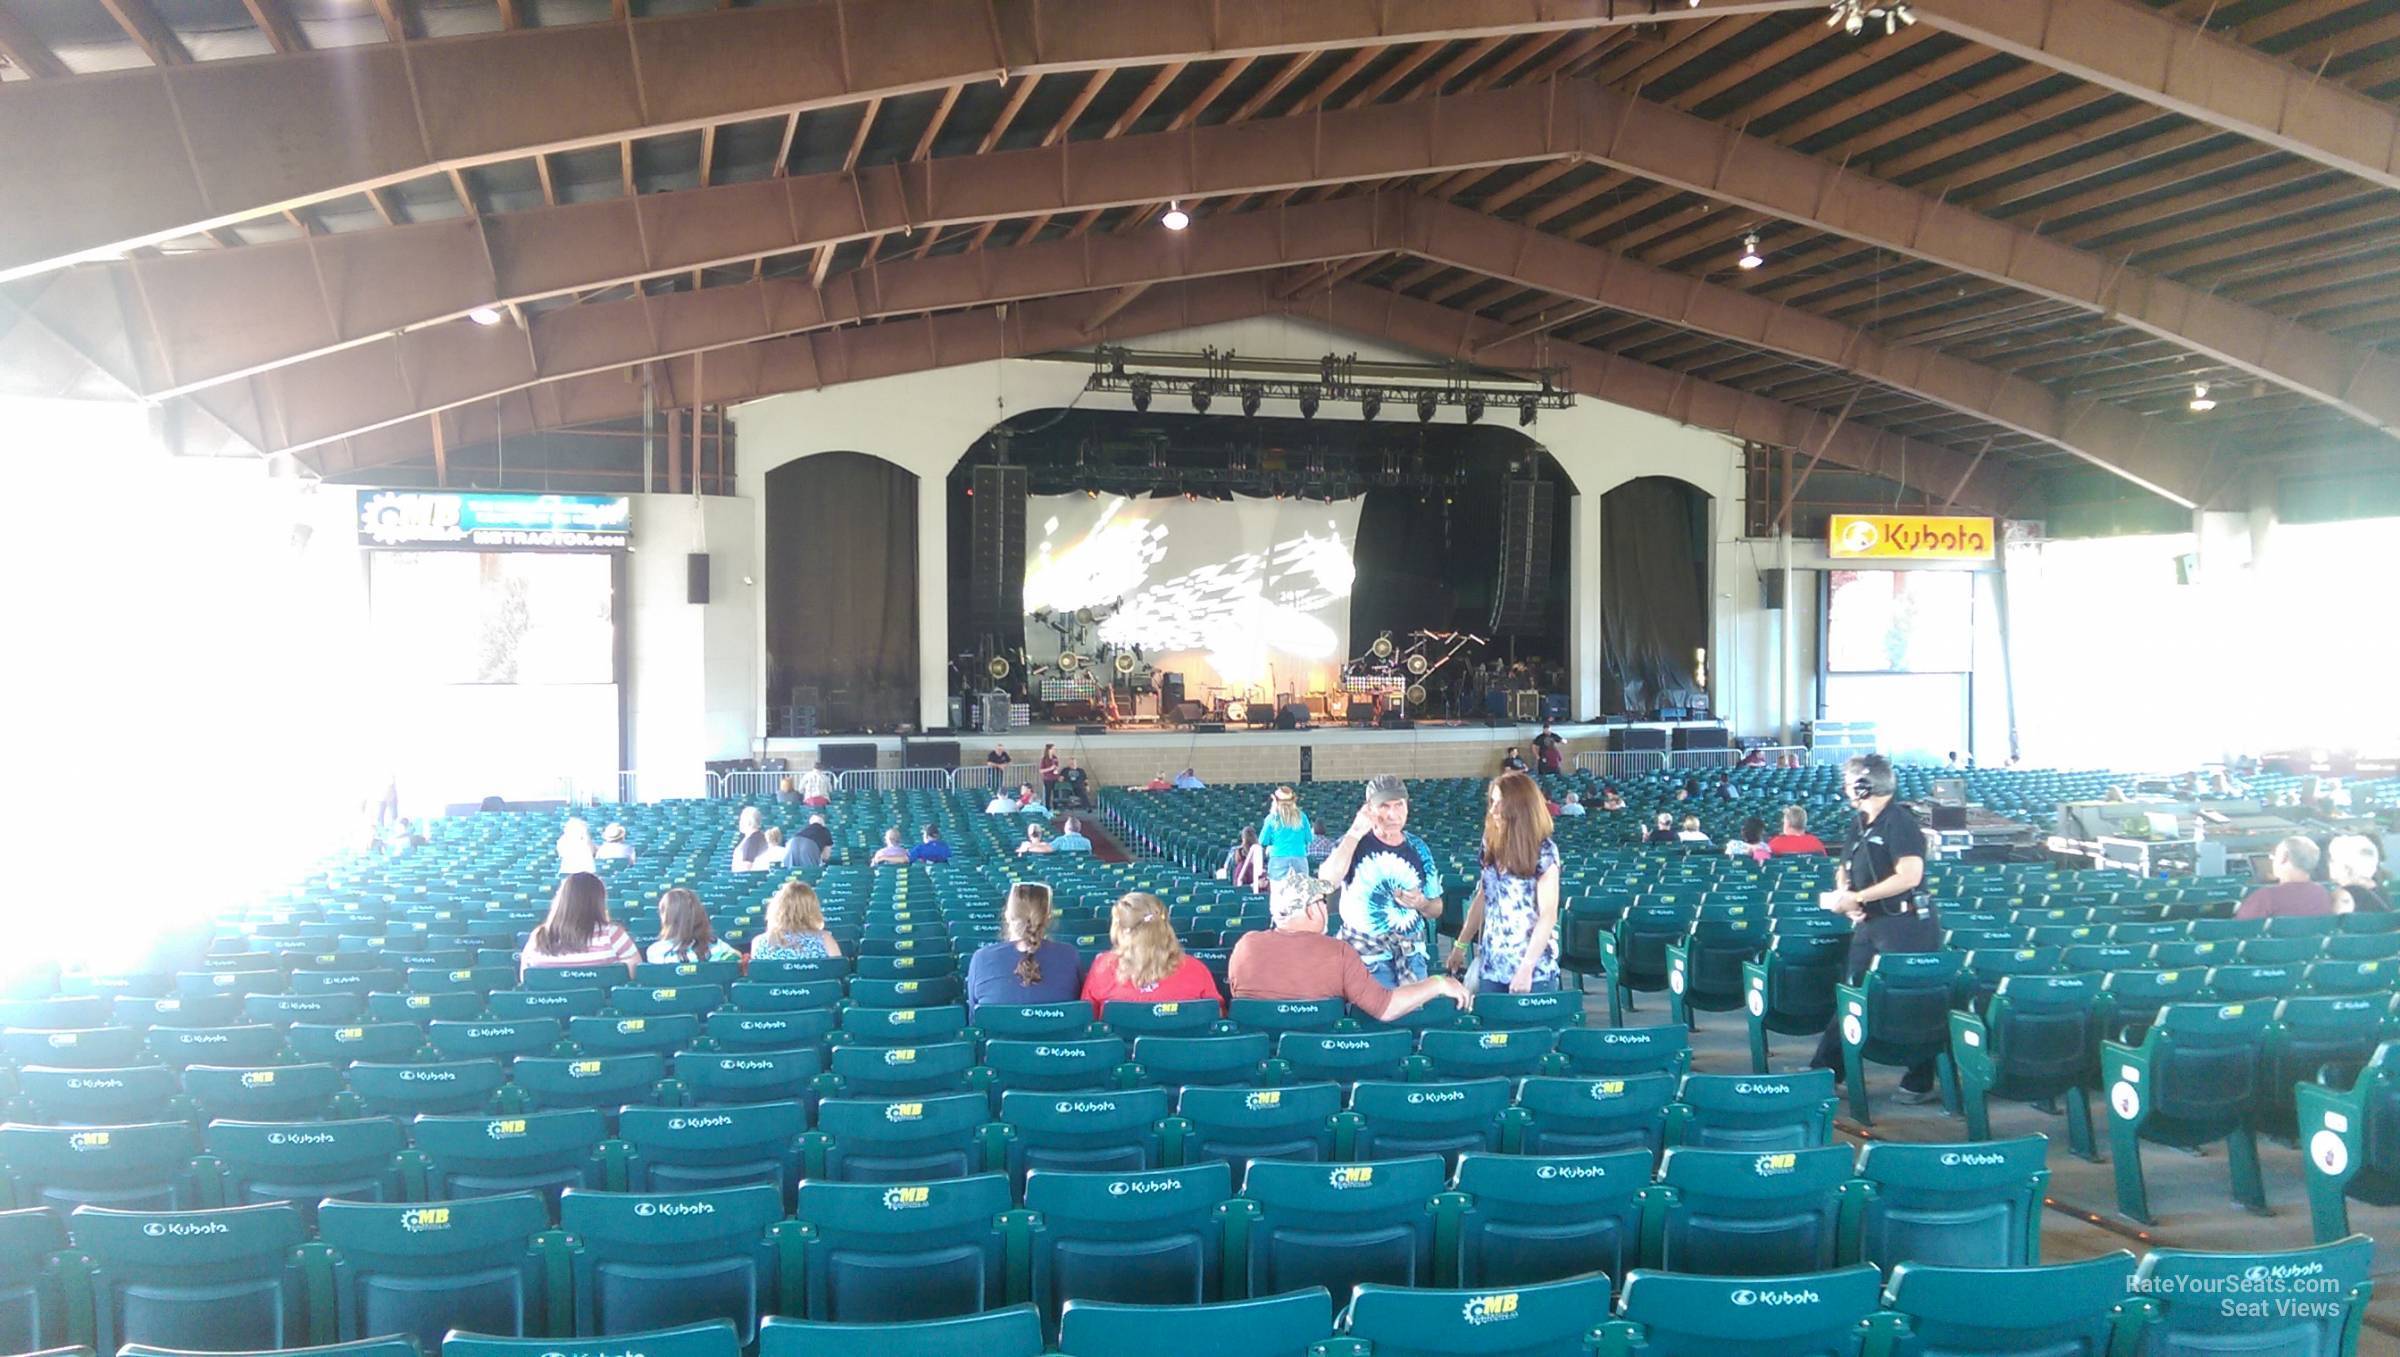 Section 2A at Bank of New Hampshire Pavilion